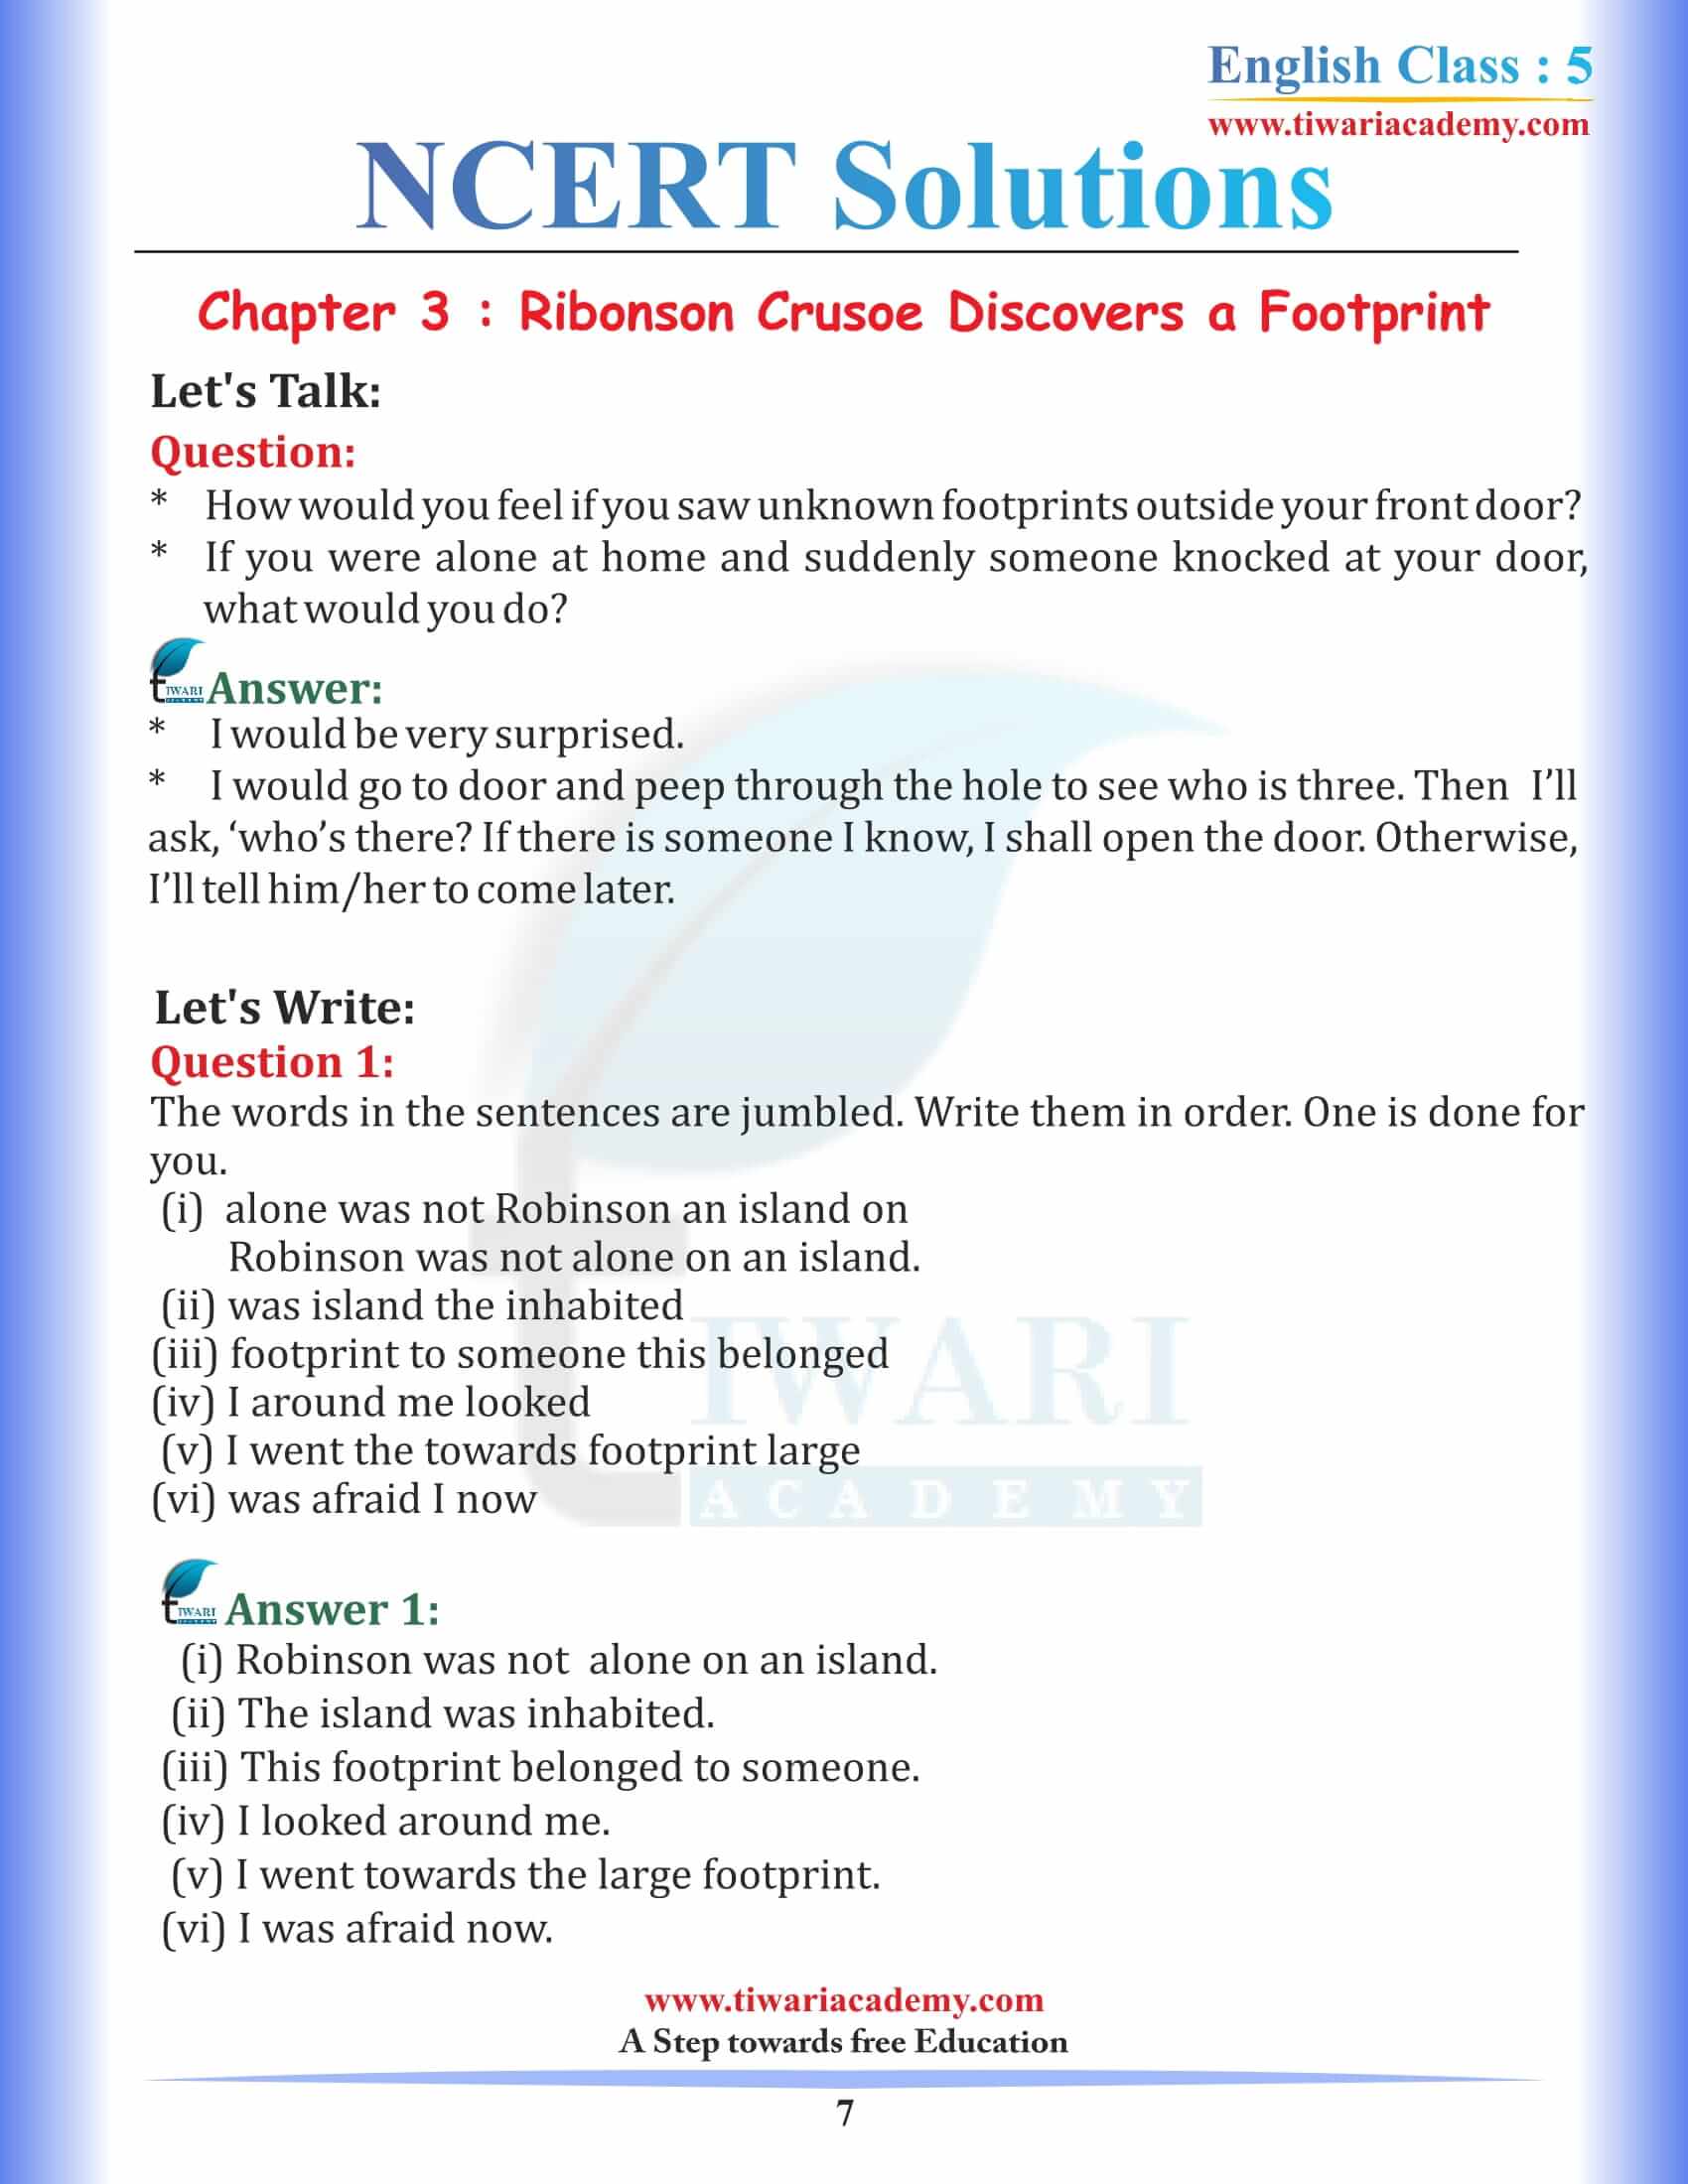 NCERT Solutions for Class 5 English Chapter 3 Robinson Crusoe Discovers a footprint in PDF